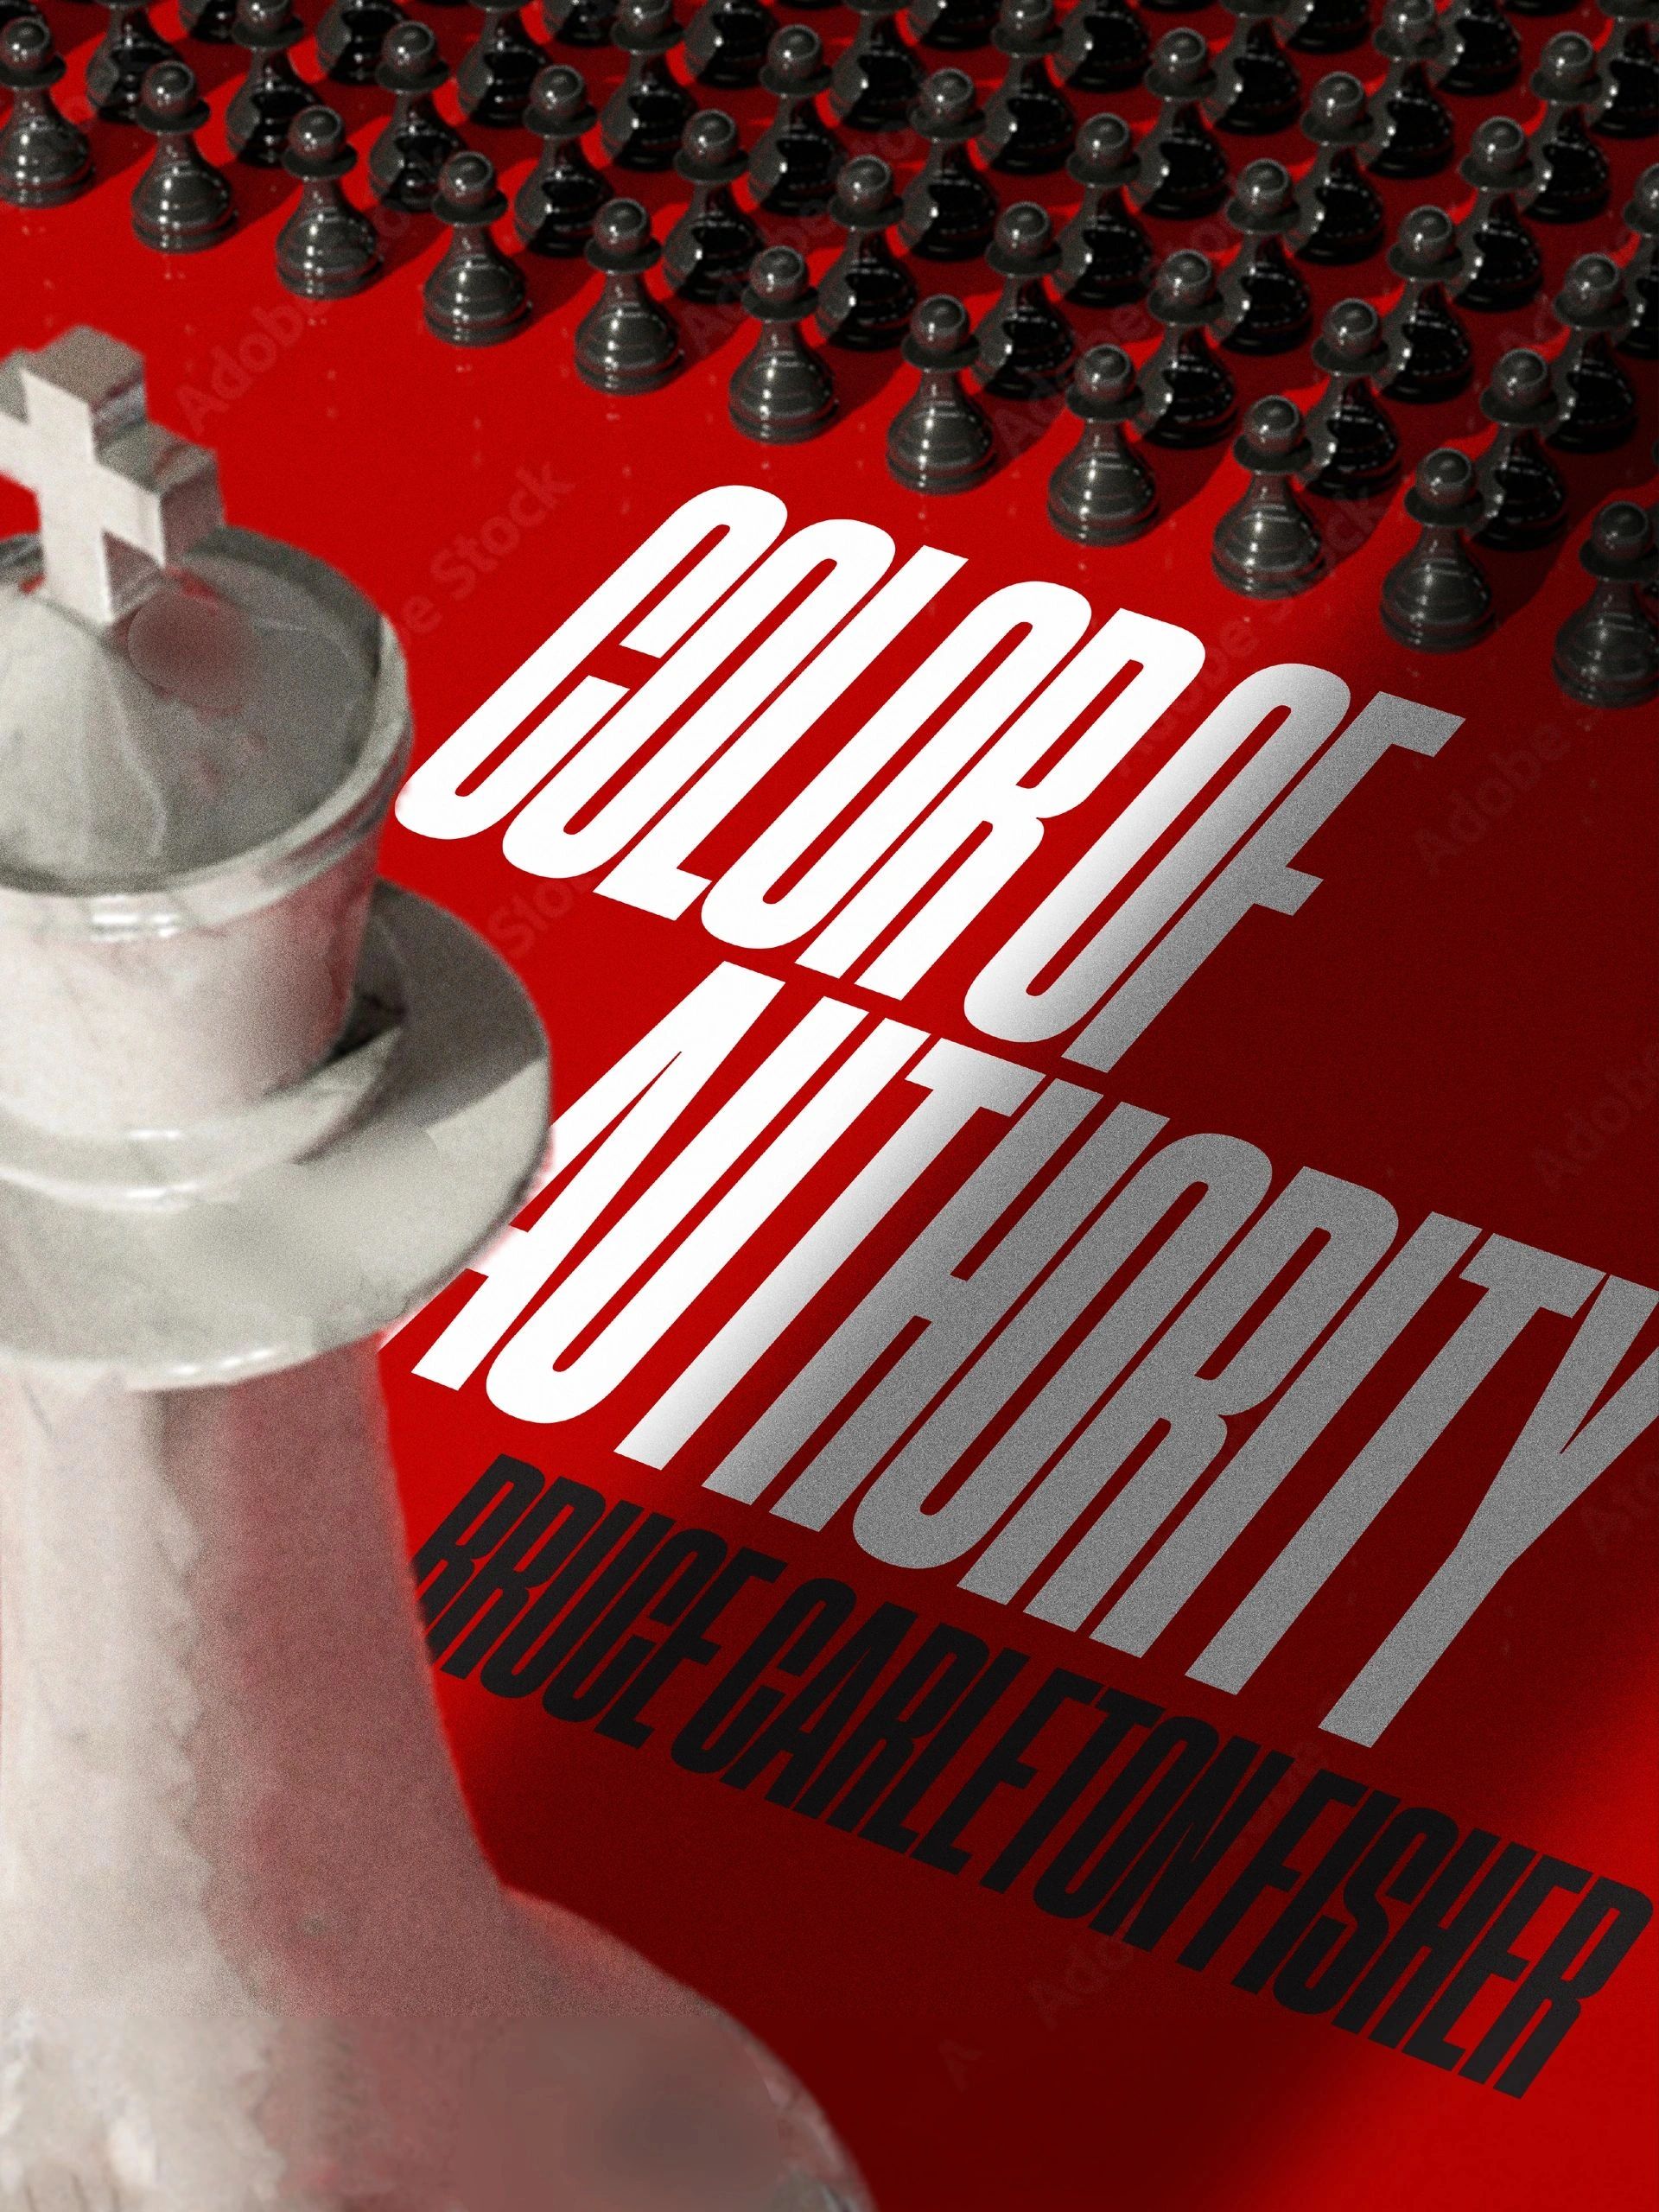 Cover of novel "Color of Authority"